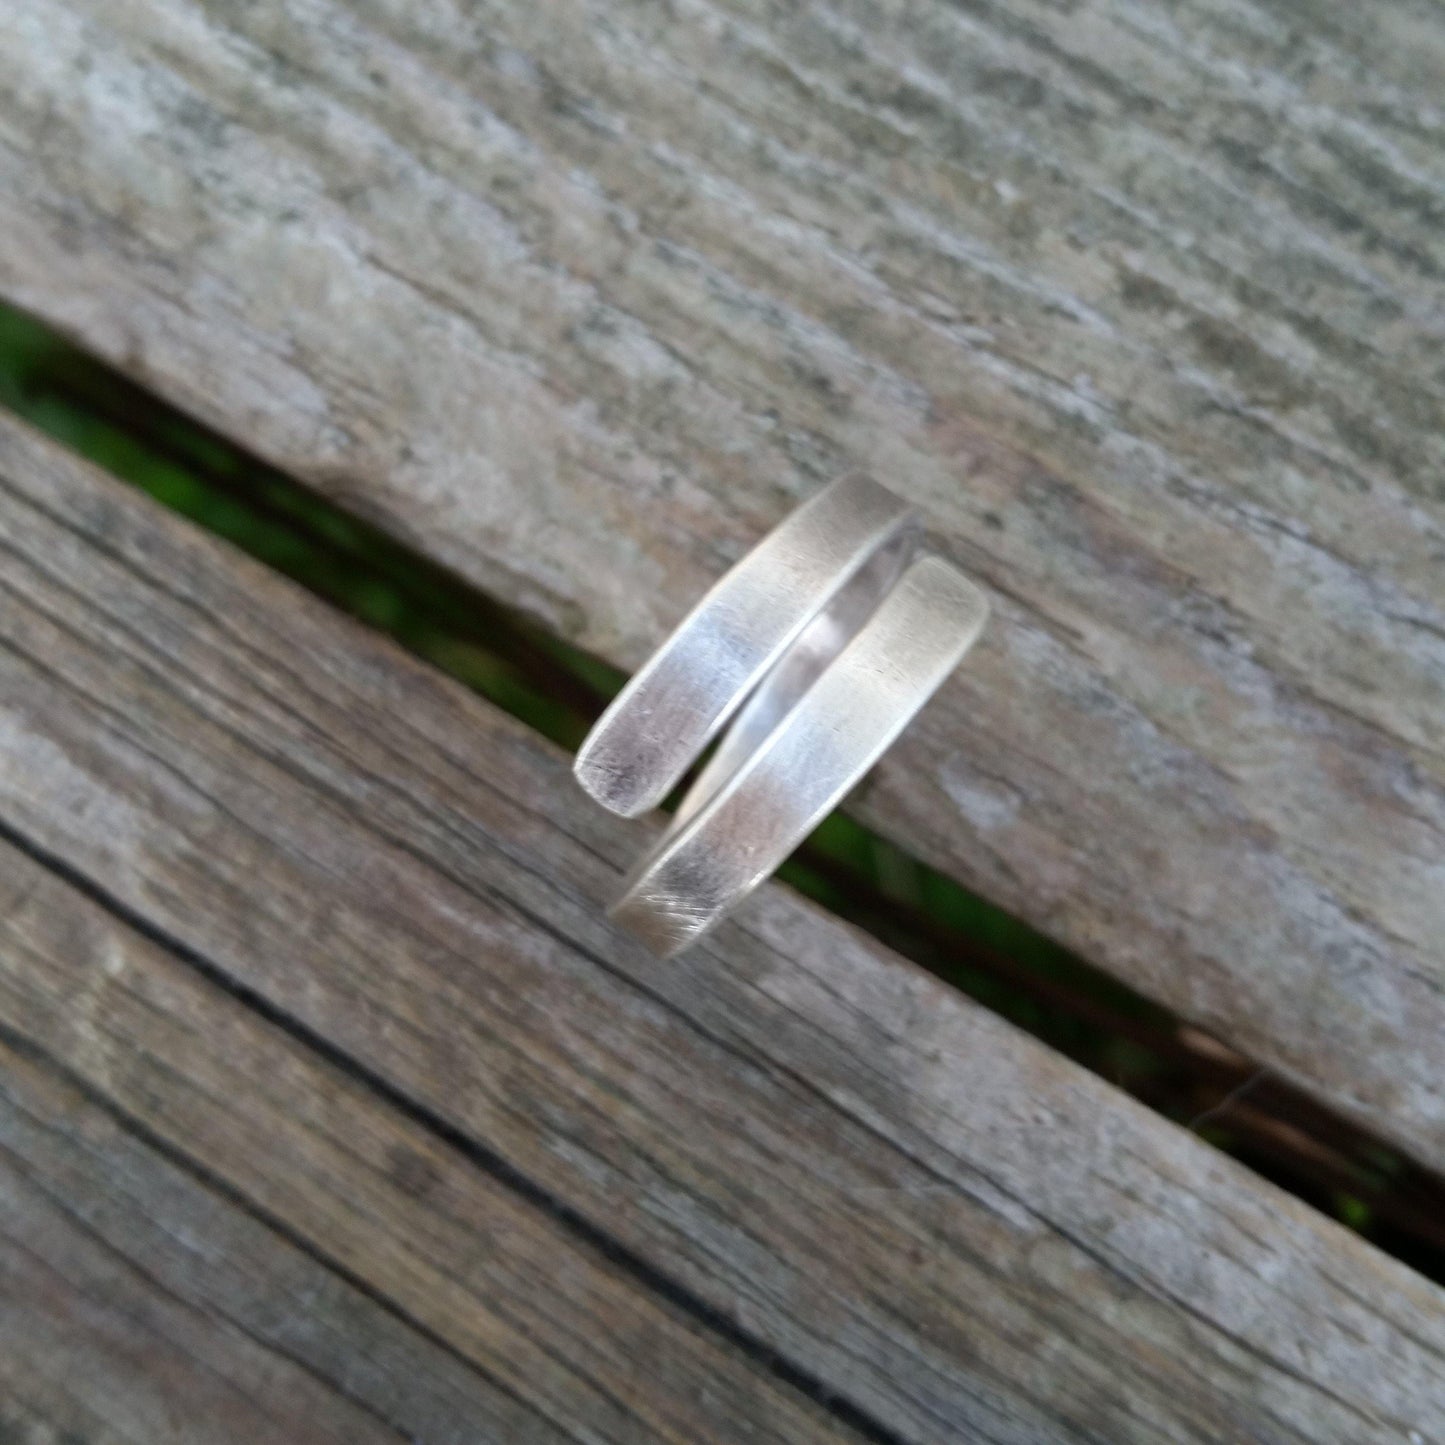 Hammered & Smooth Sterling Silver Wrap Rings - Custom Made-loraleeartist.myshopify.com